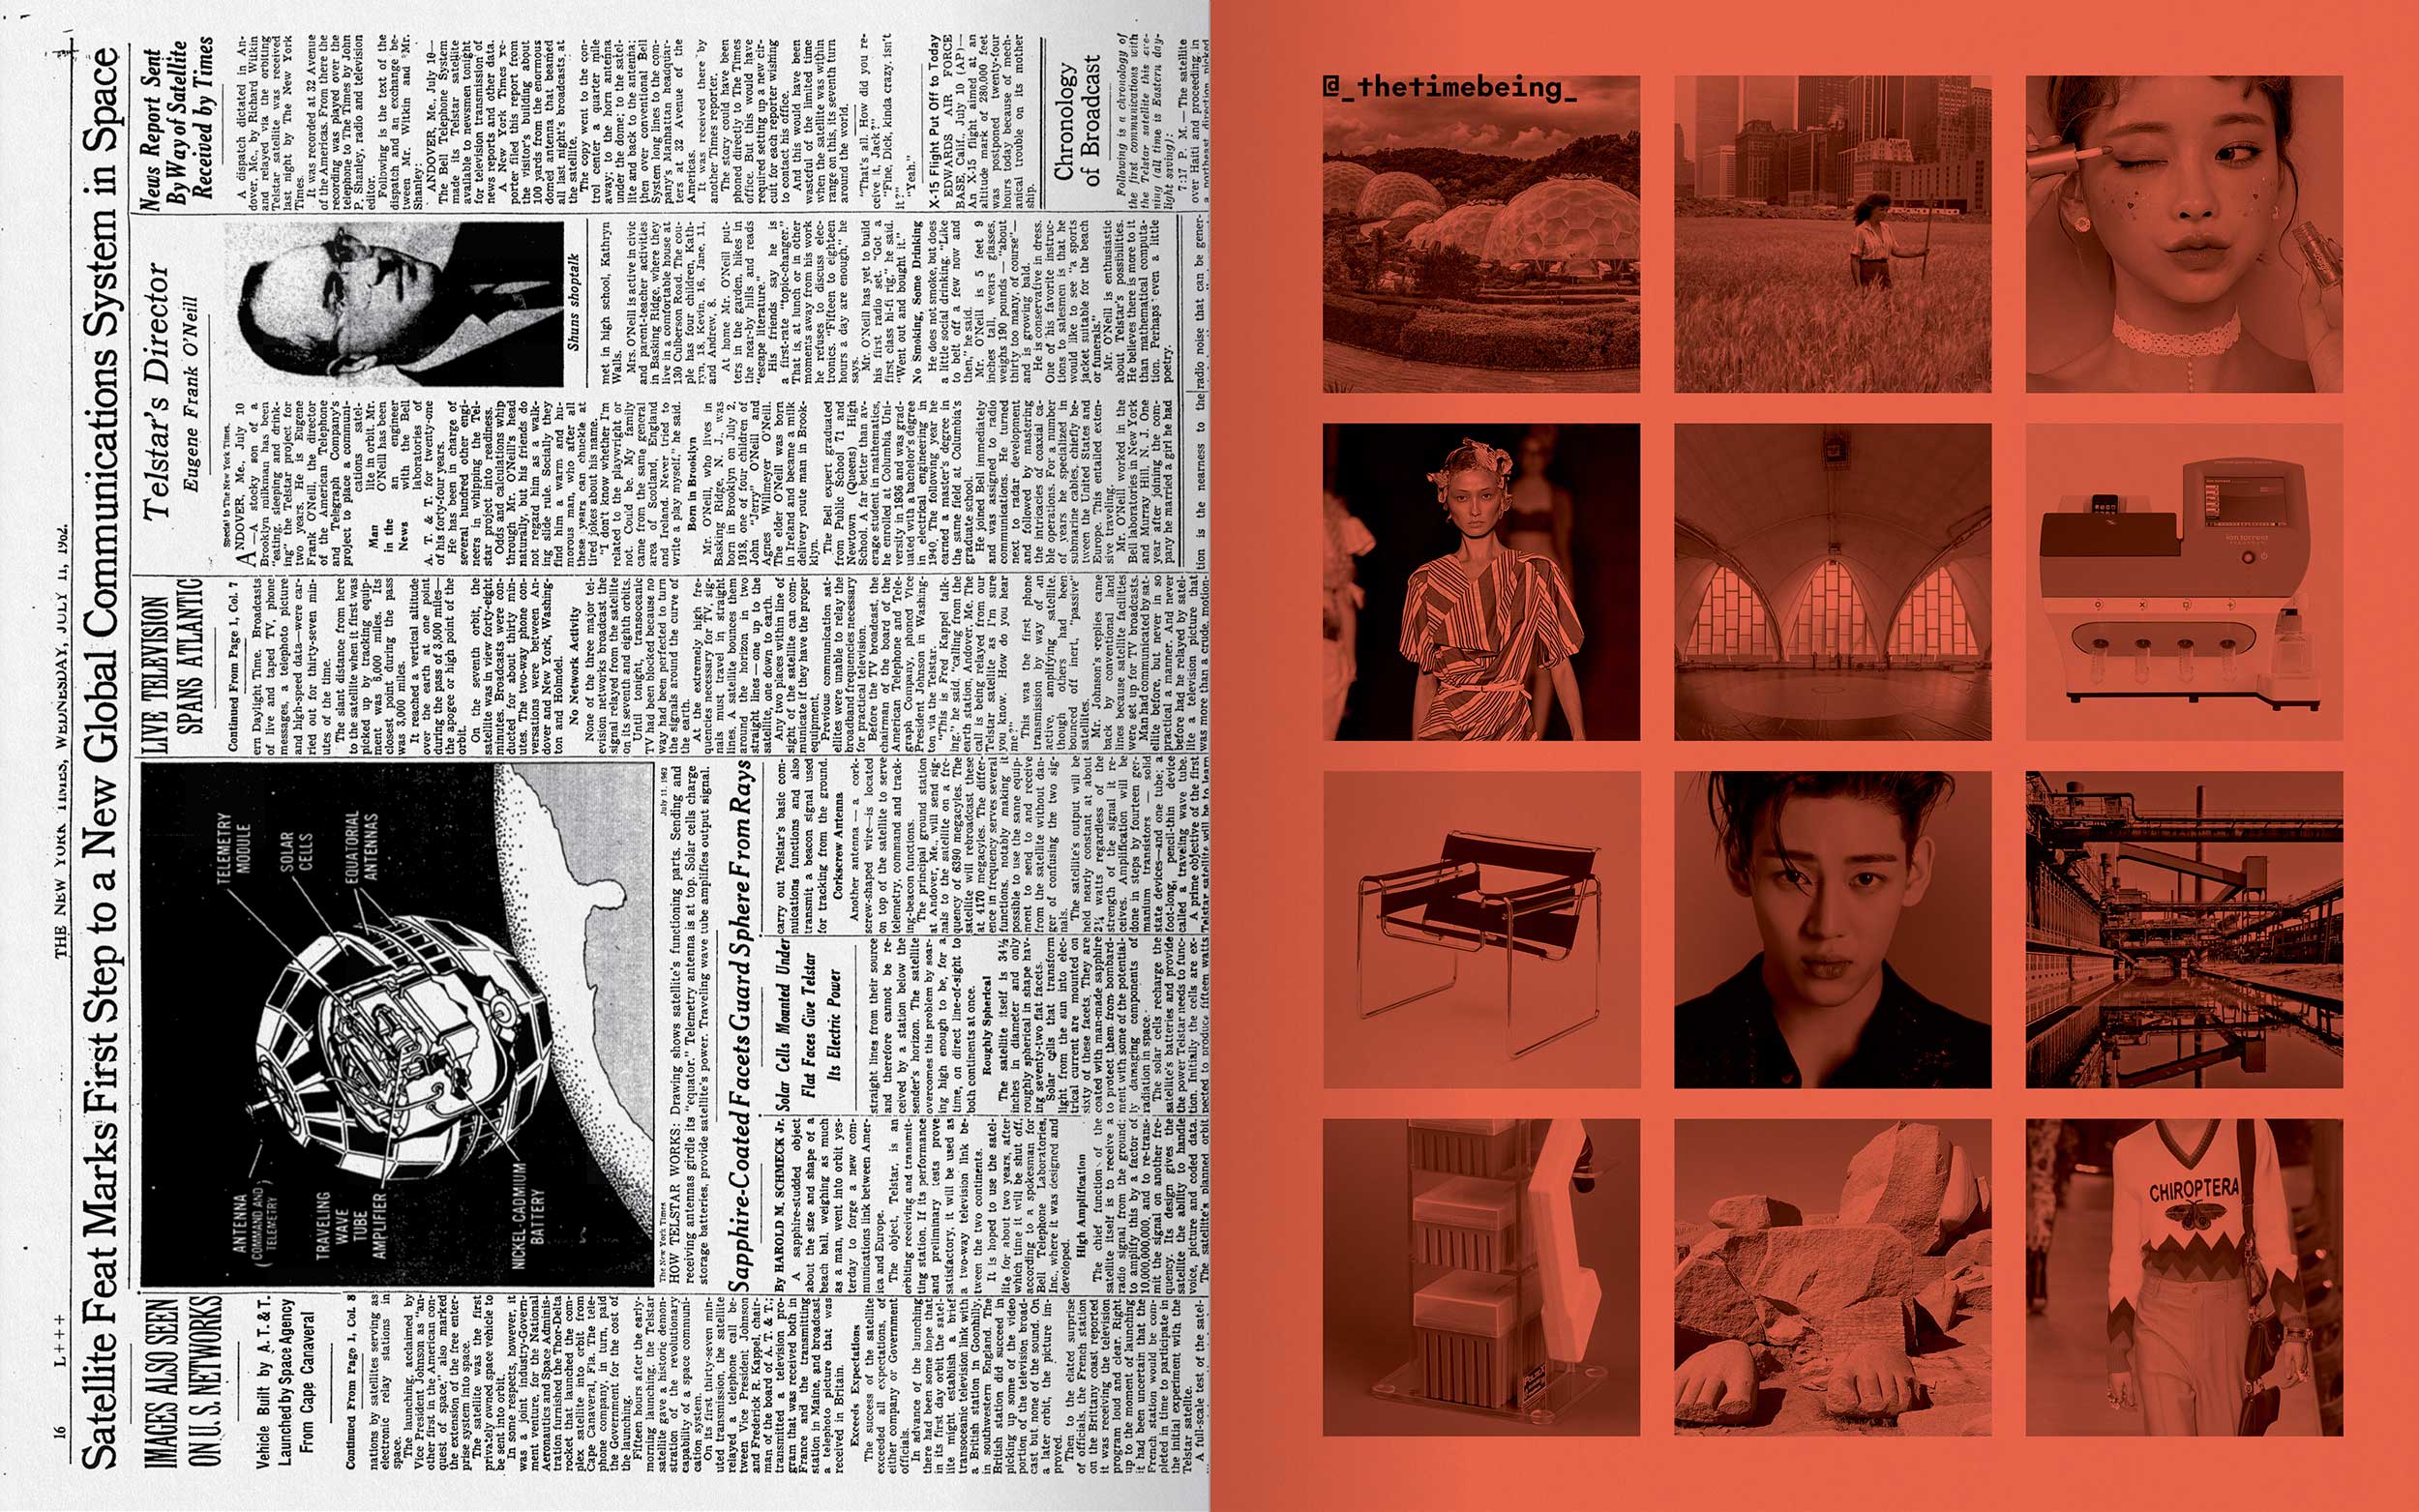 Zine spread showing a reprinted 1962 New York Times article on the Telstar satellite on left with a grid of black-and-white images from ecology to K-beauty to Gucci printed on fluorescent orange paper